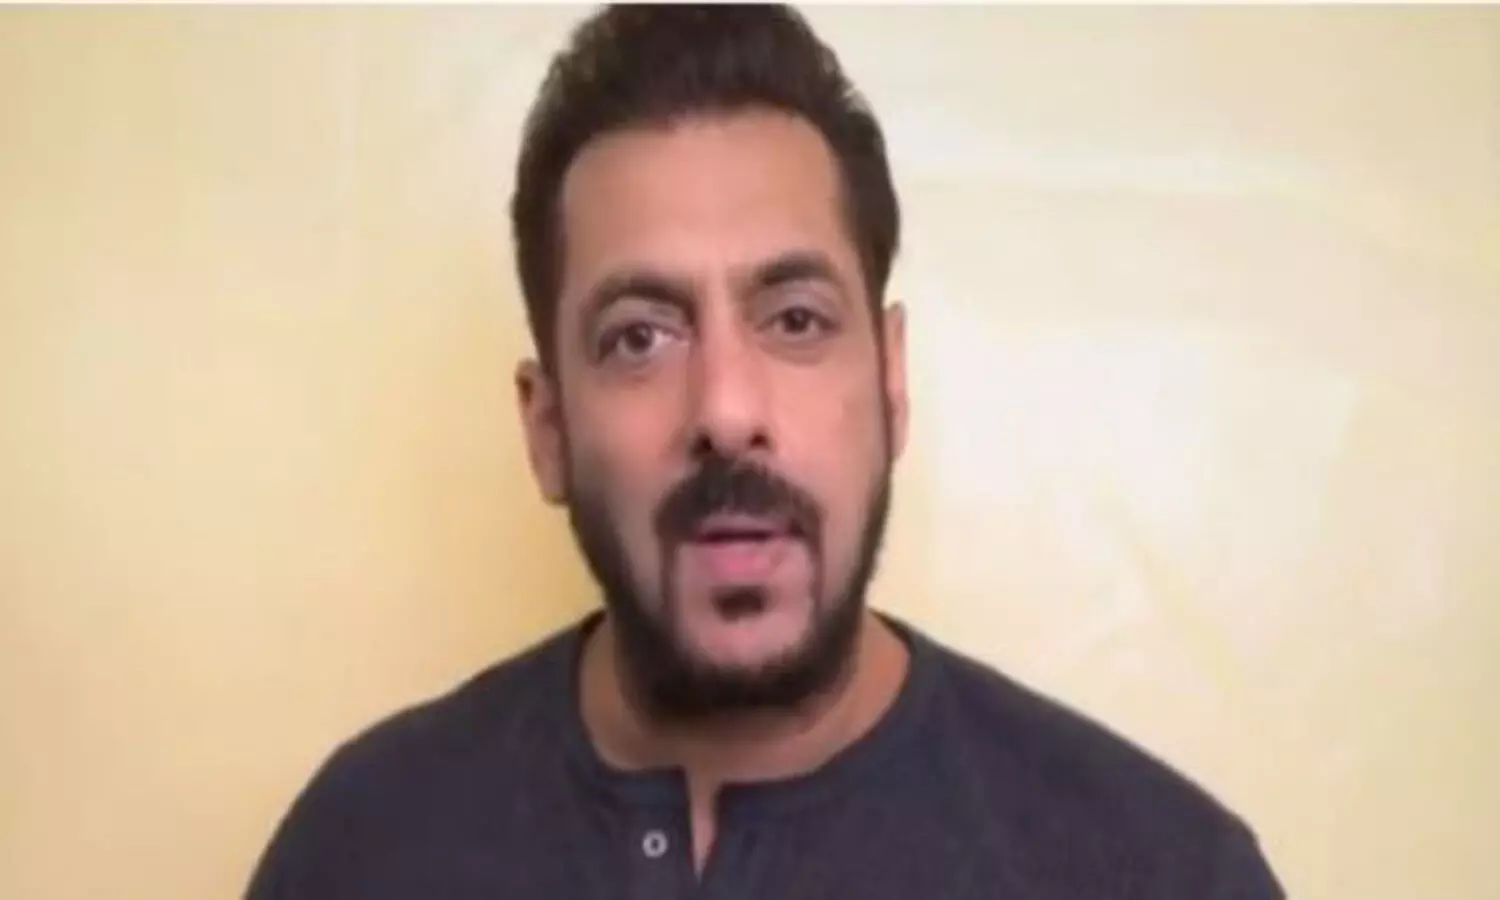 Tokyo Olympics: Salman Khan gives a victory punch as he cheers for Indian contingent in video